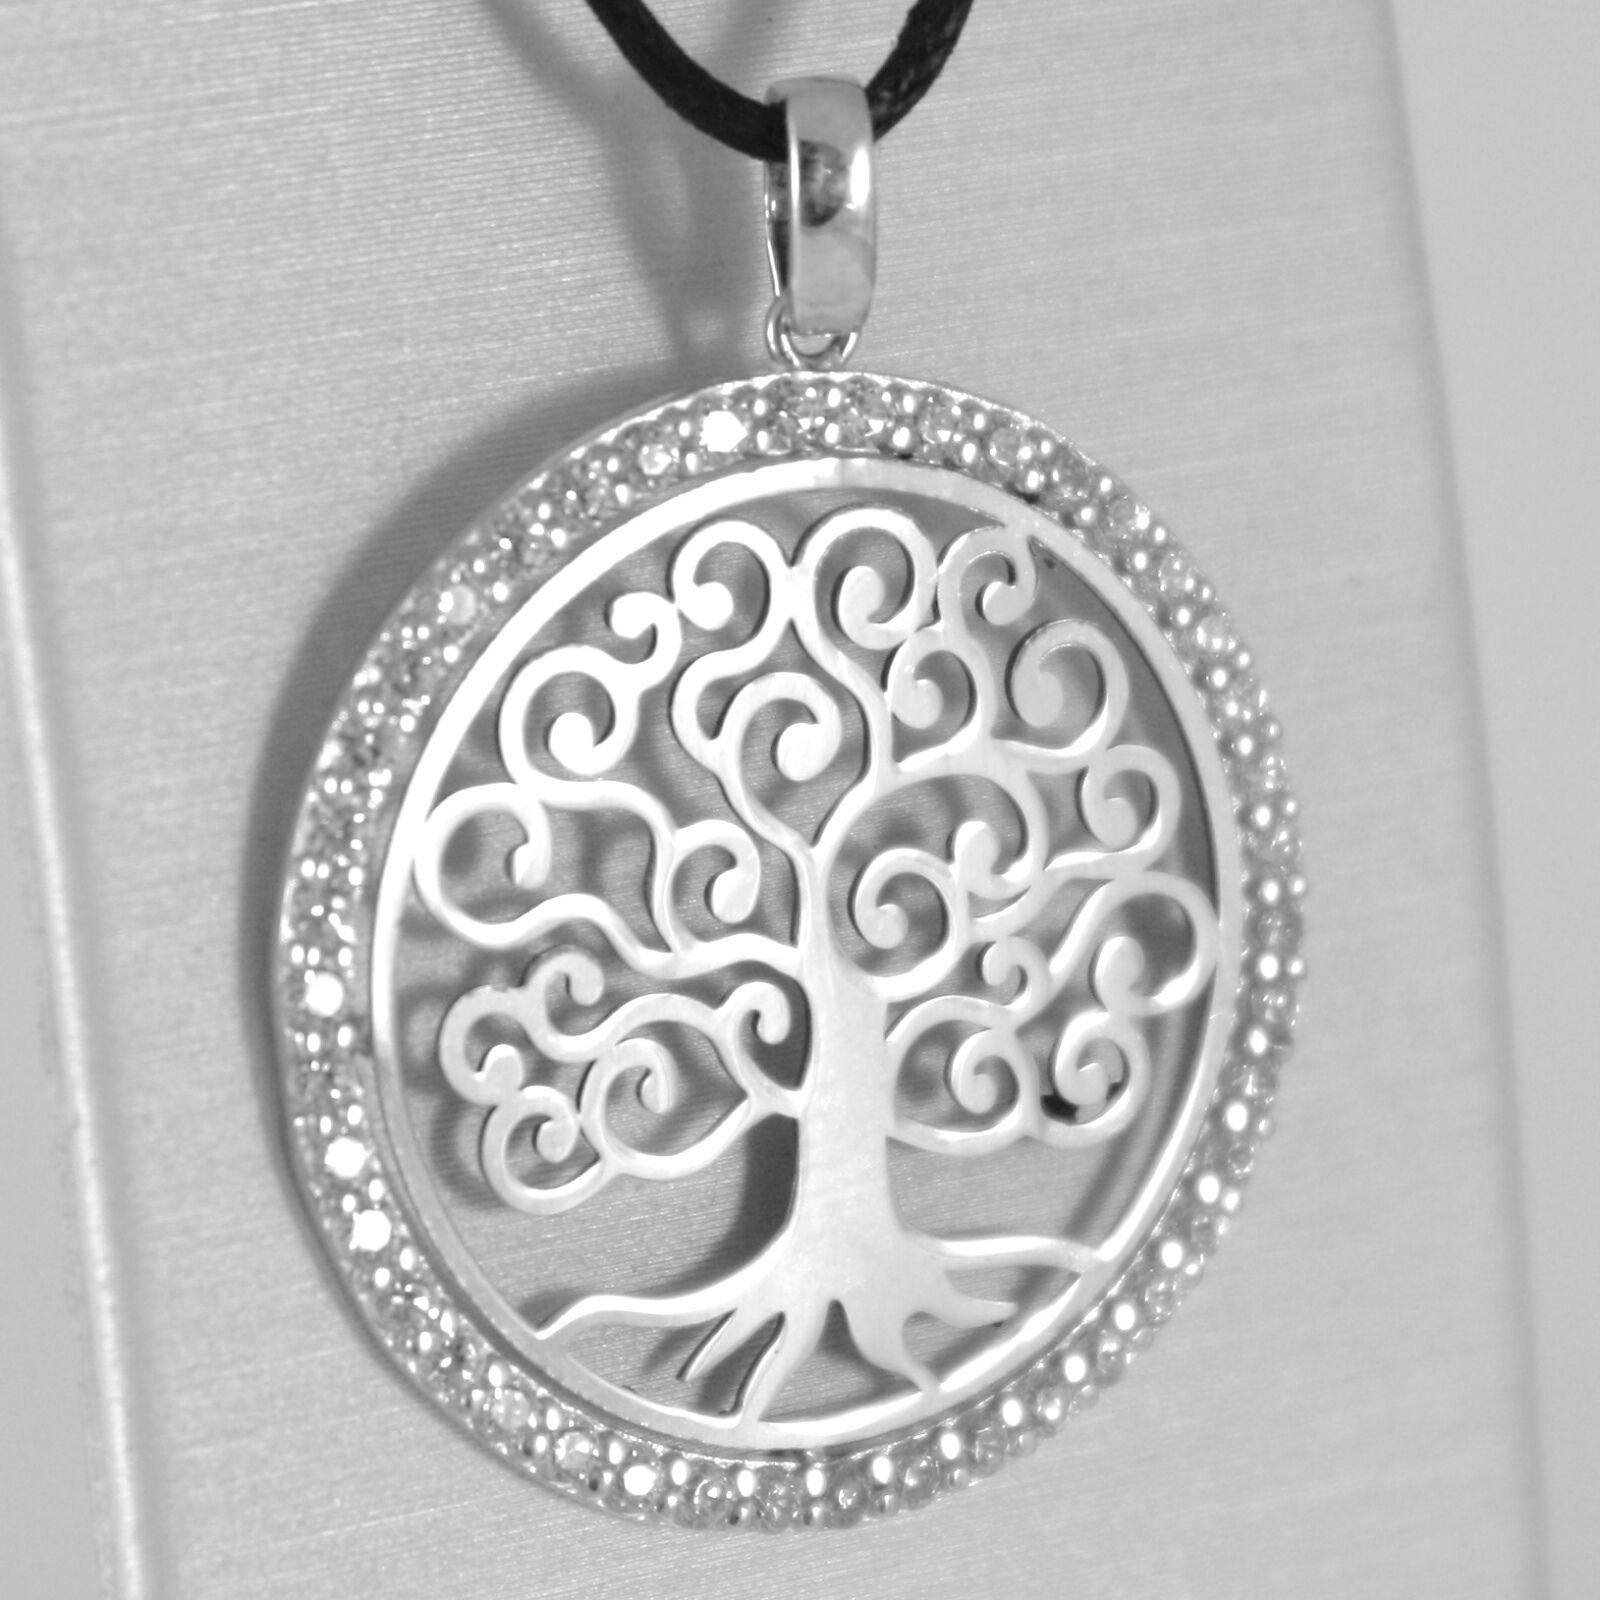 Primary image for 18K WHITE GOLD TREE OF LIFE PENDANT, 1.22 INCHES, ZIRCONIA, MADE IN ITALY